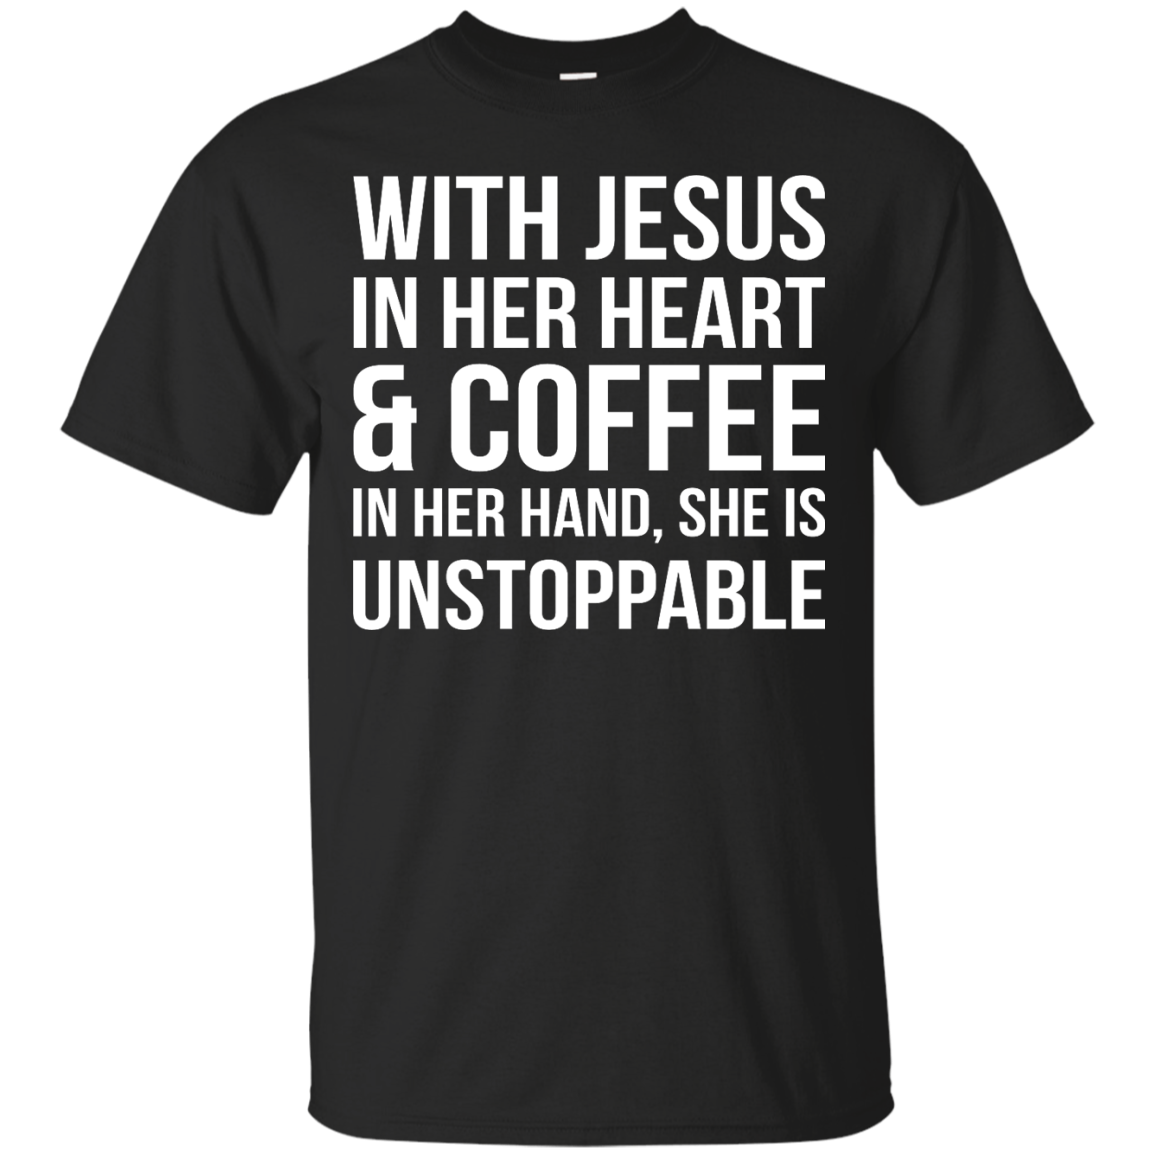 With Jesus In Her Heart And Coffee In Her Hand shirt, tank